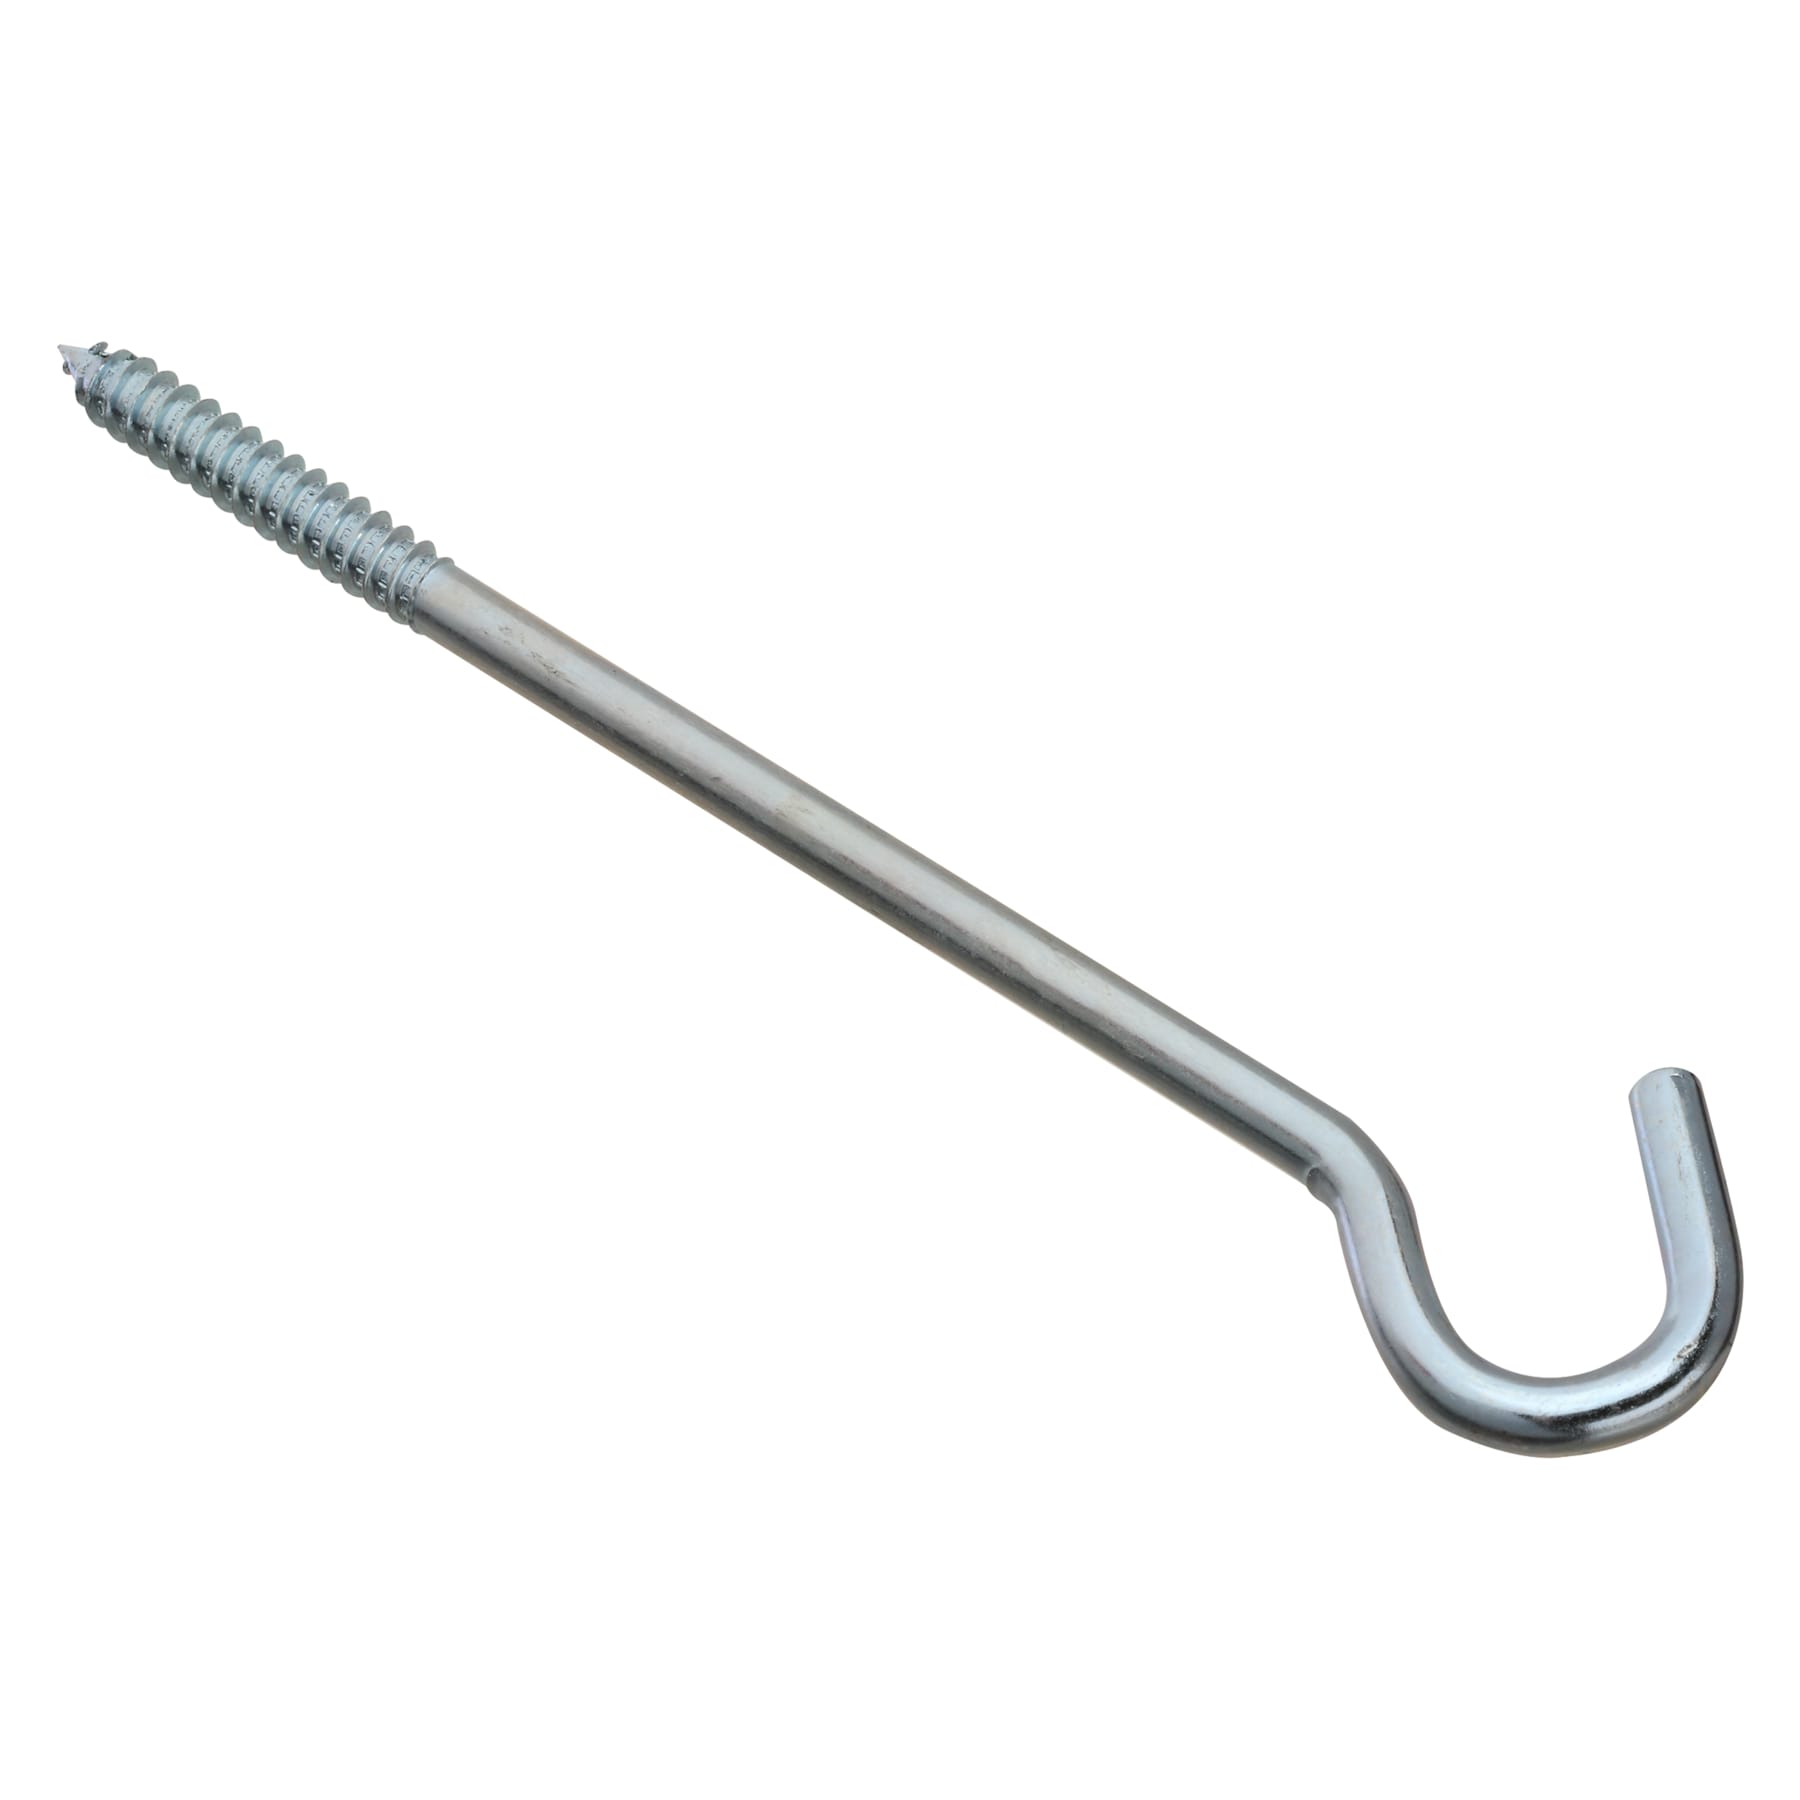 National Hardware N117-911 Hook And Eyes 2 Inch Zinc Plated Steel 2 Pack:  Gate Hook and Eye or Hook and Staple - Steel (038613117914-2)